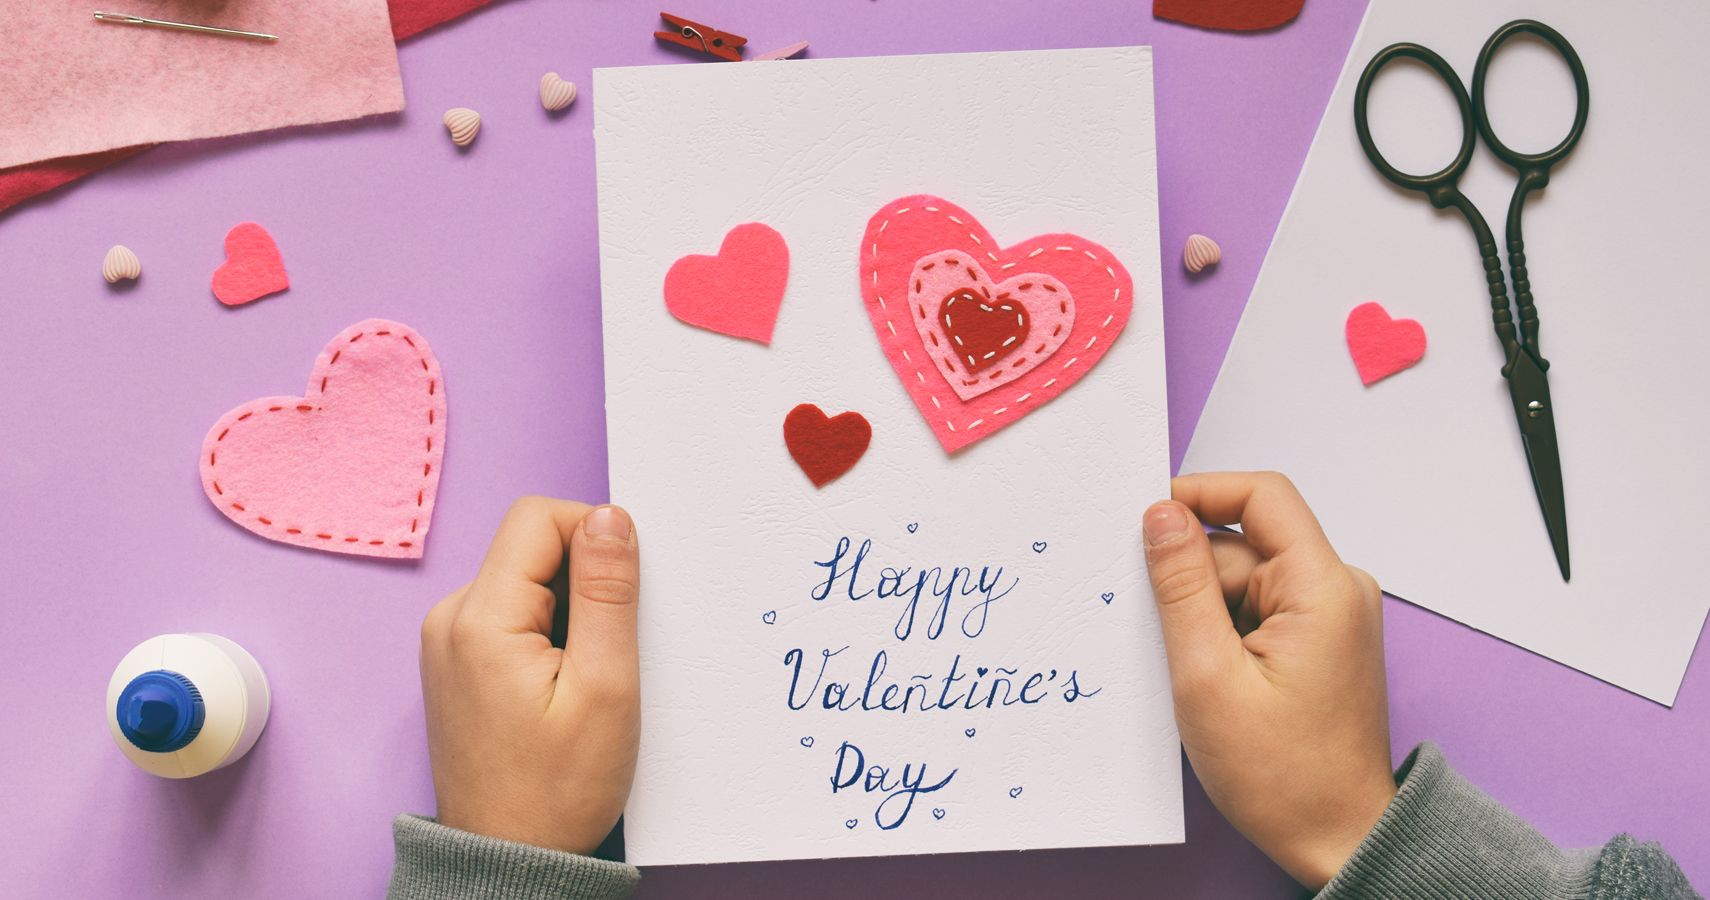 Should Parent’s Be Giving Their Children A Valentine’s Day Gift?